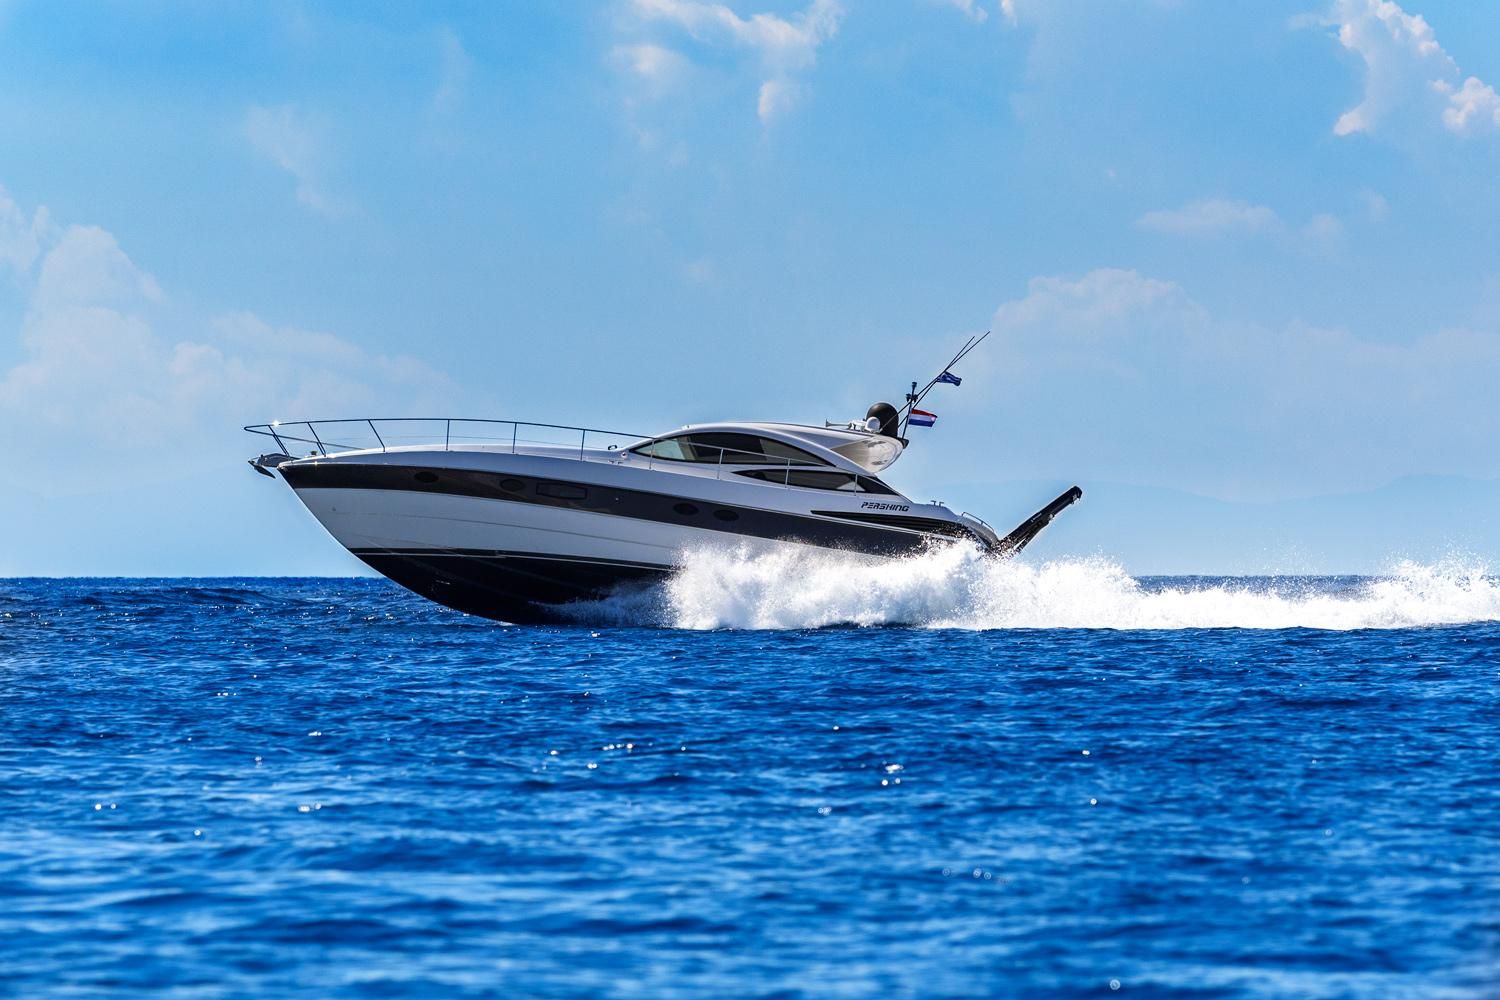 pershing 46 yacht for sale